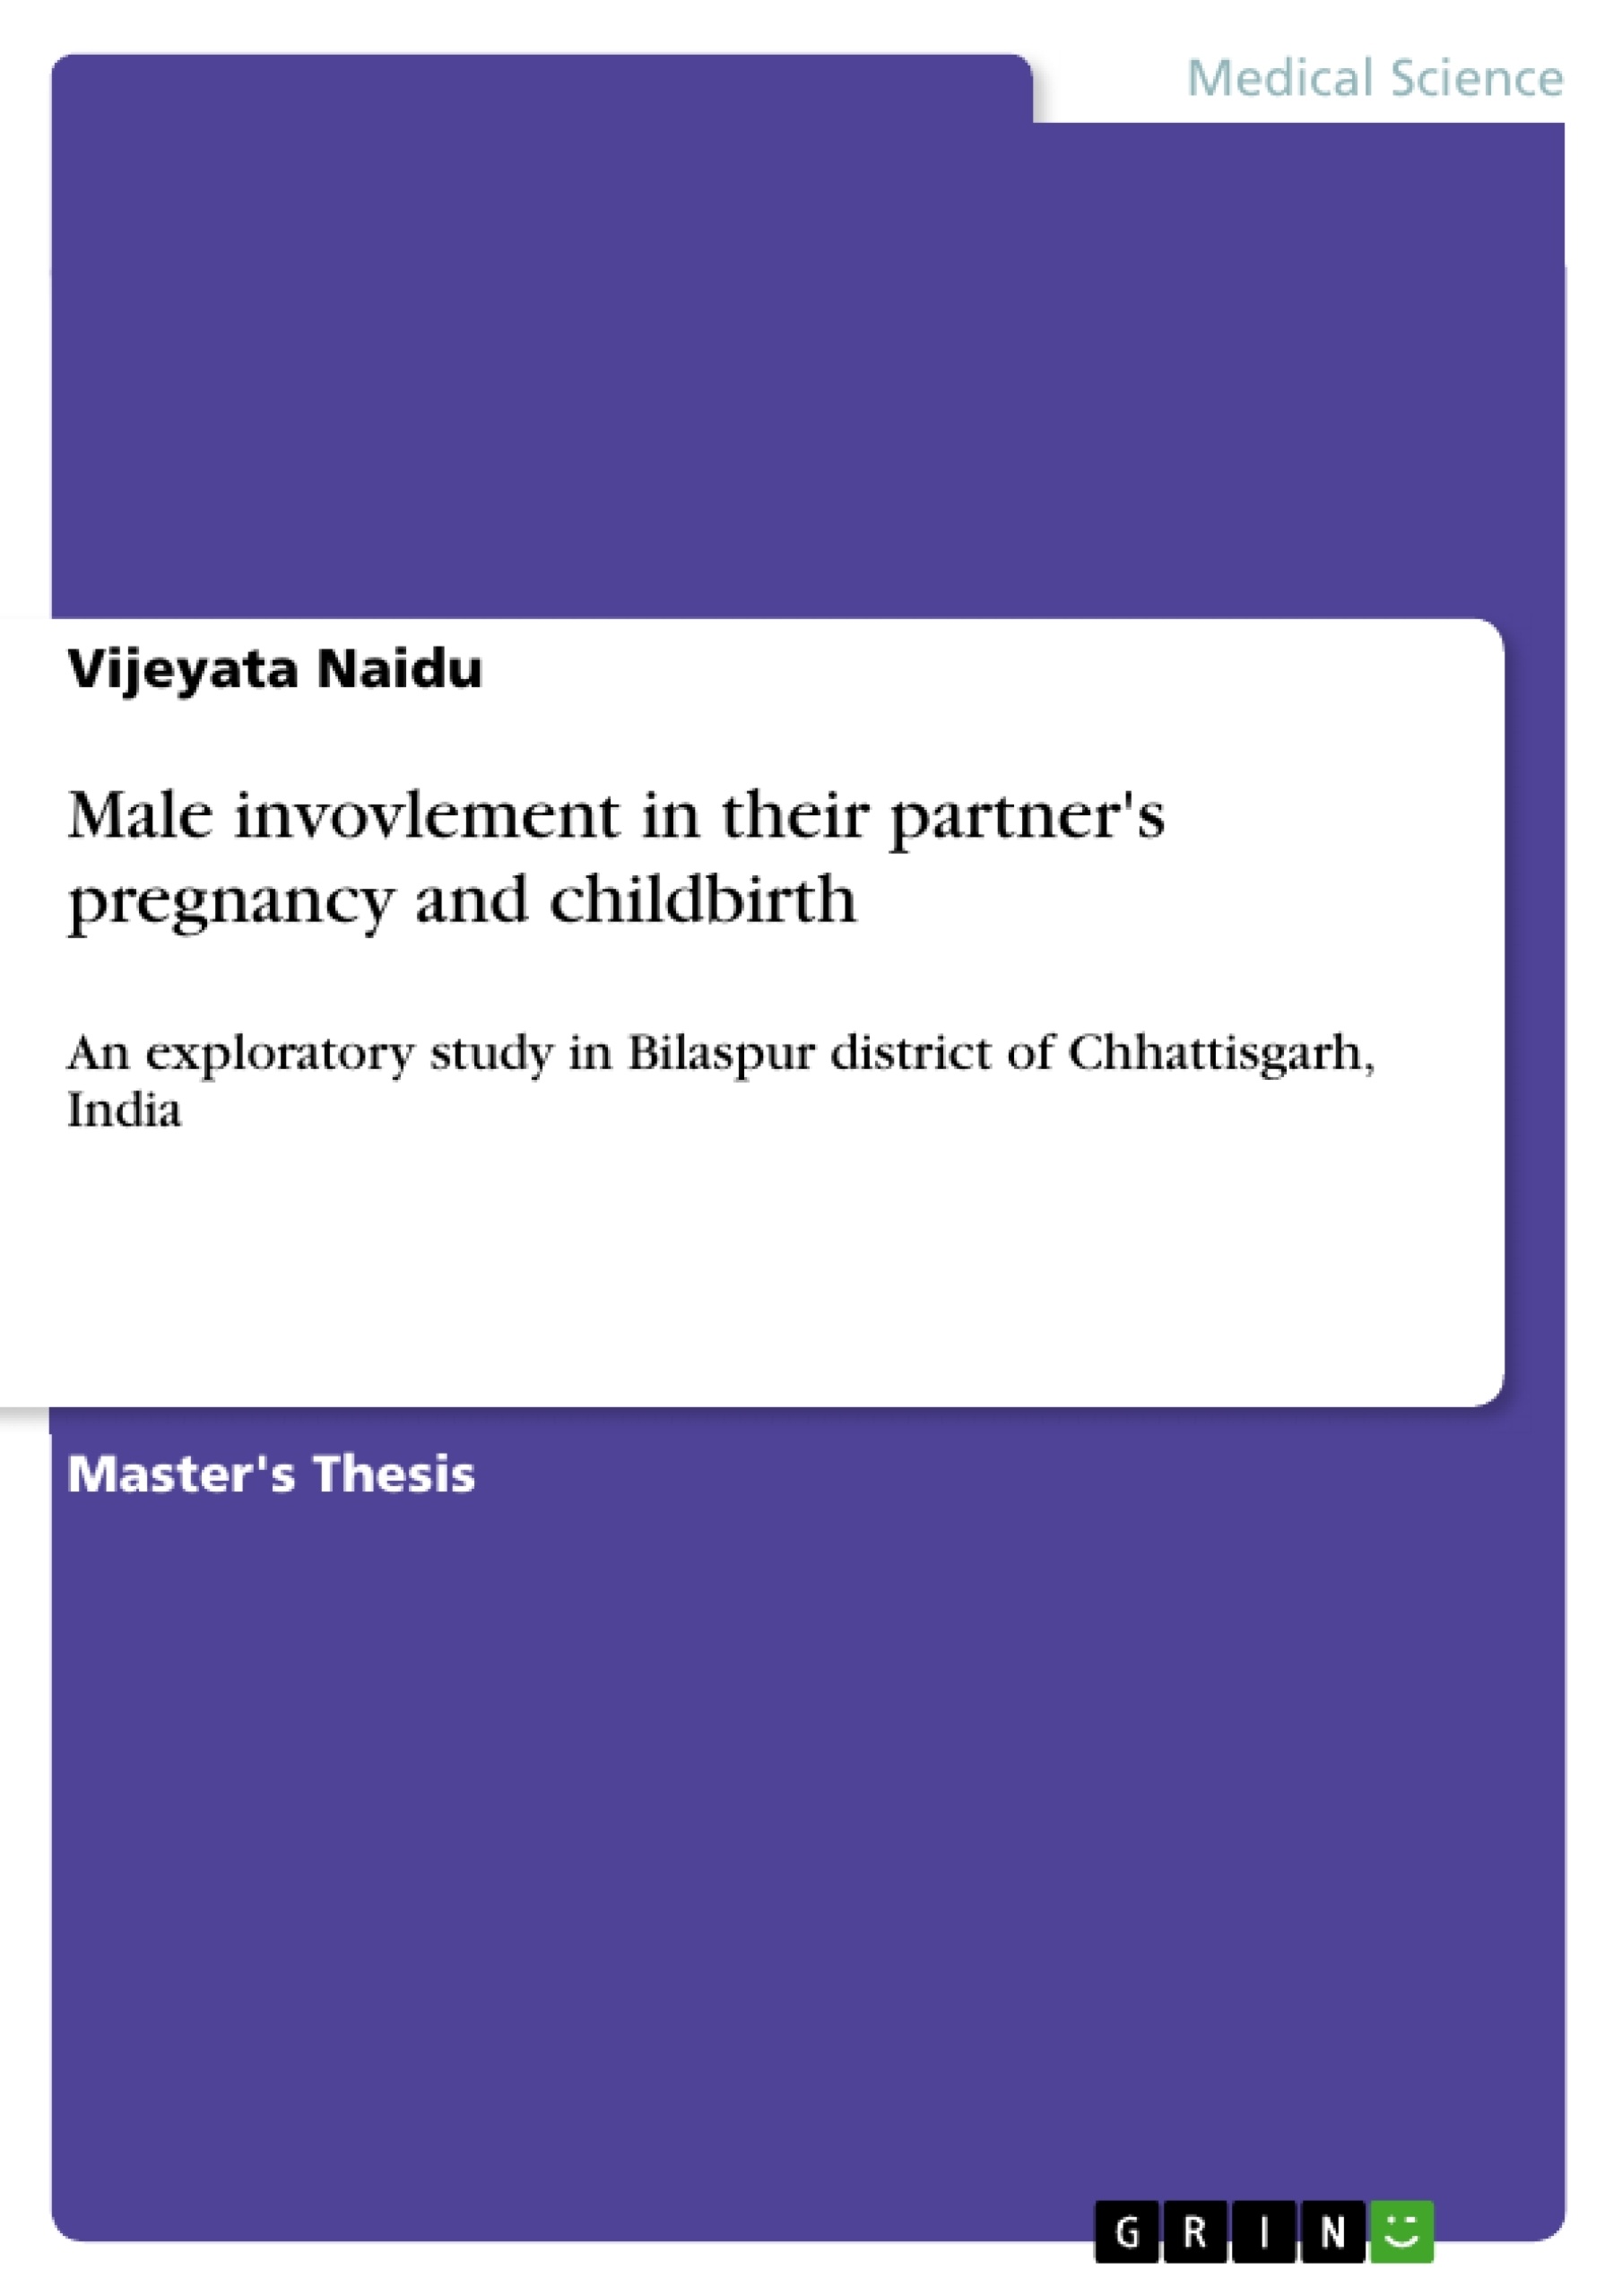 Título: Male invovlement in their partner's pregnancy and childbirth